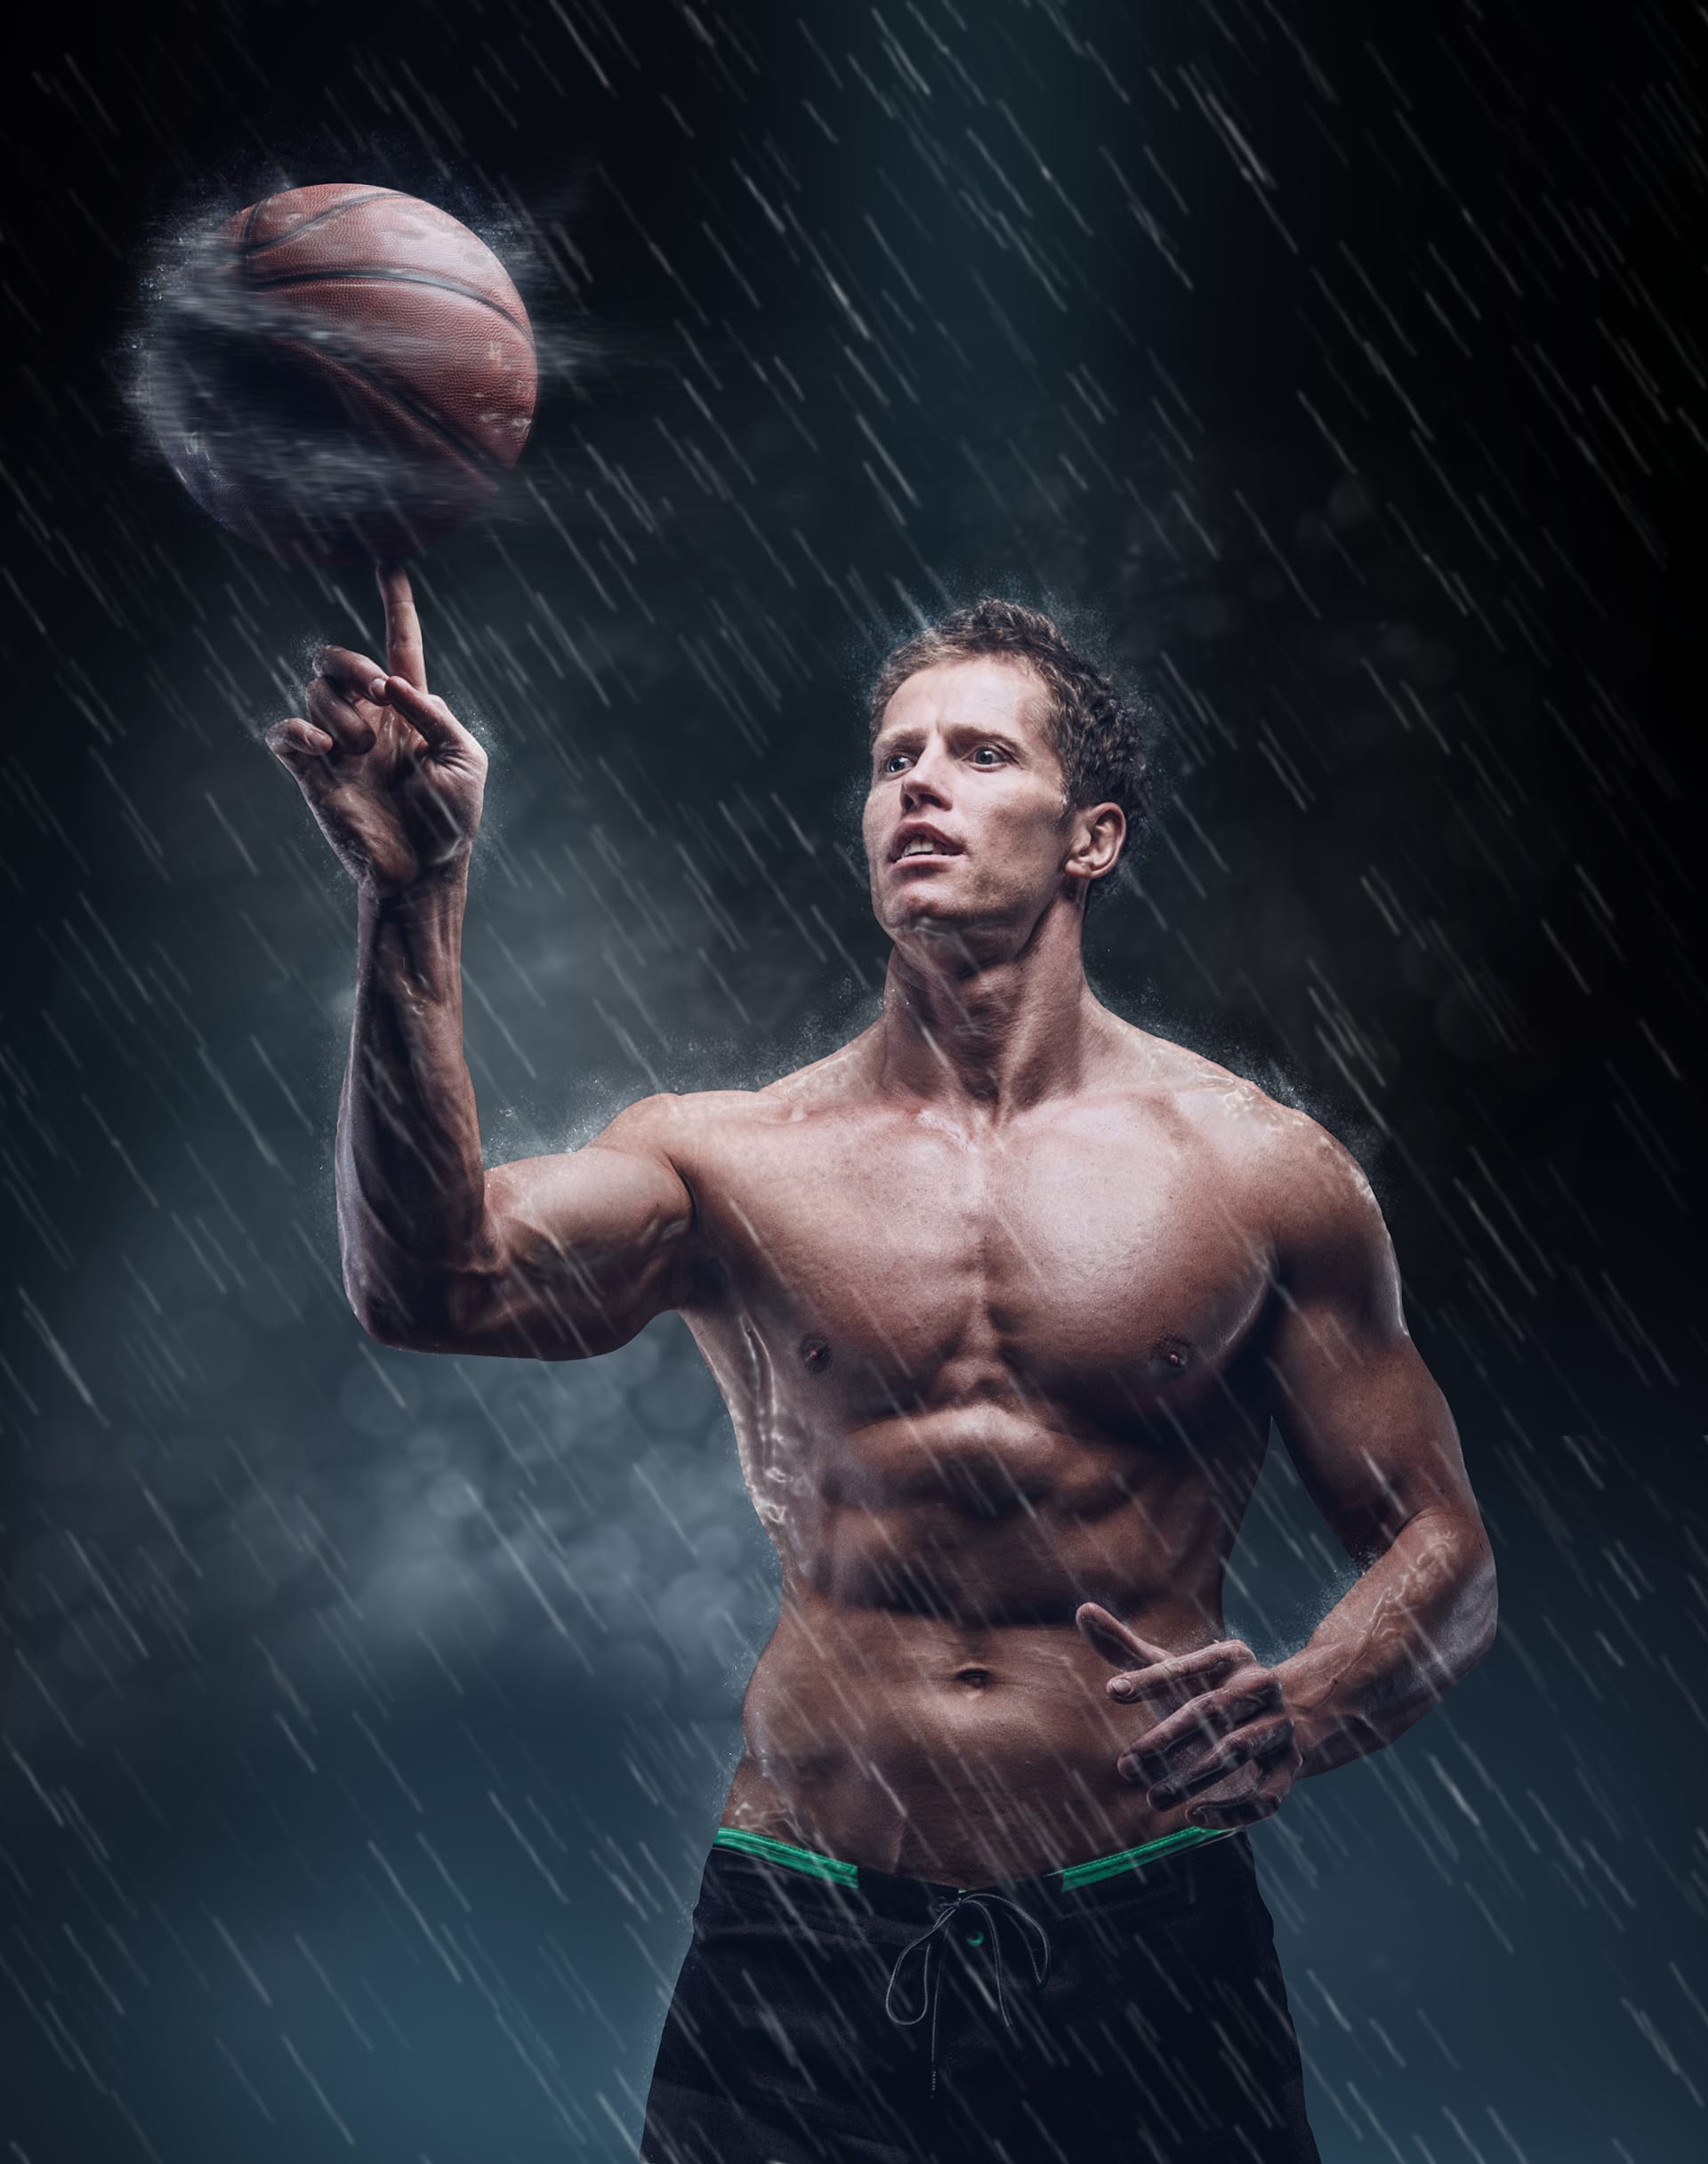 Artistic portrait shirtless wet bascetball player droplets nice image